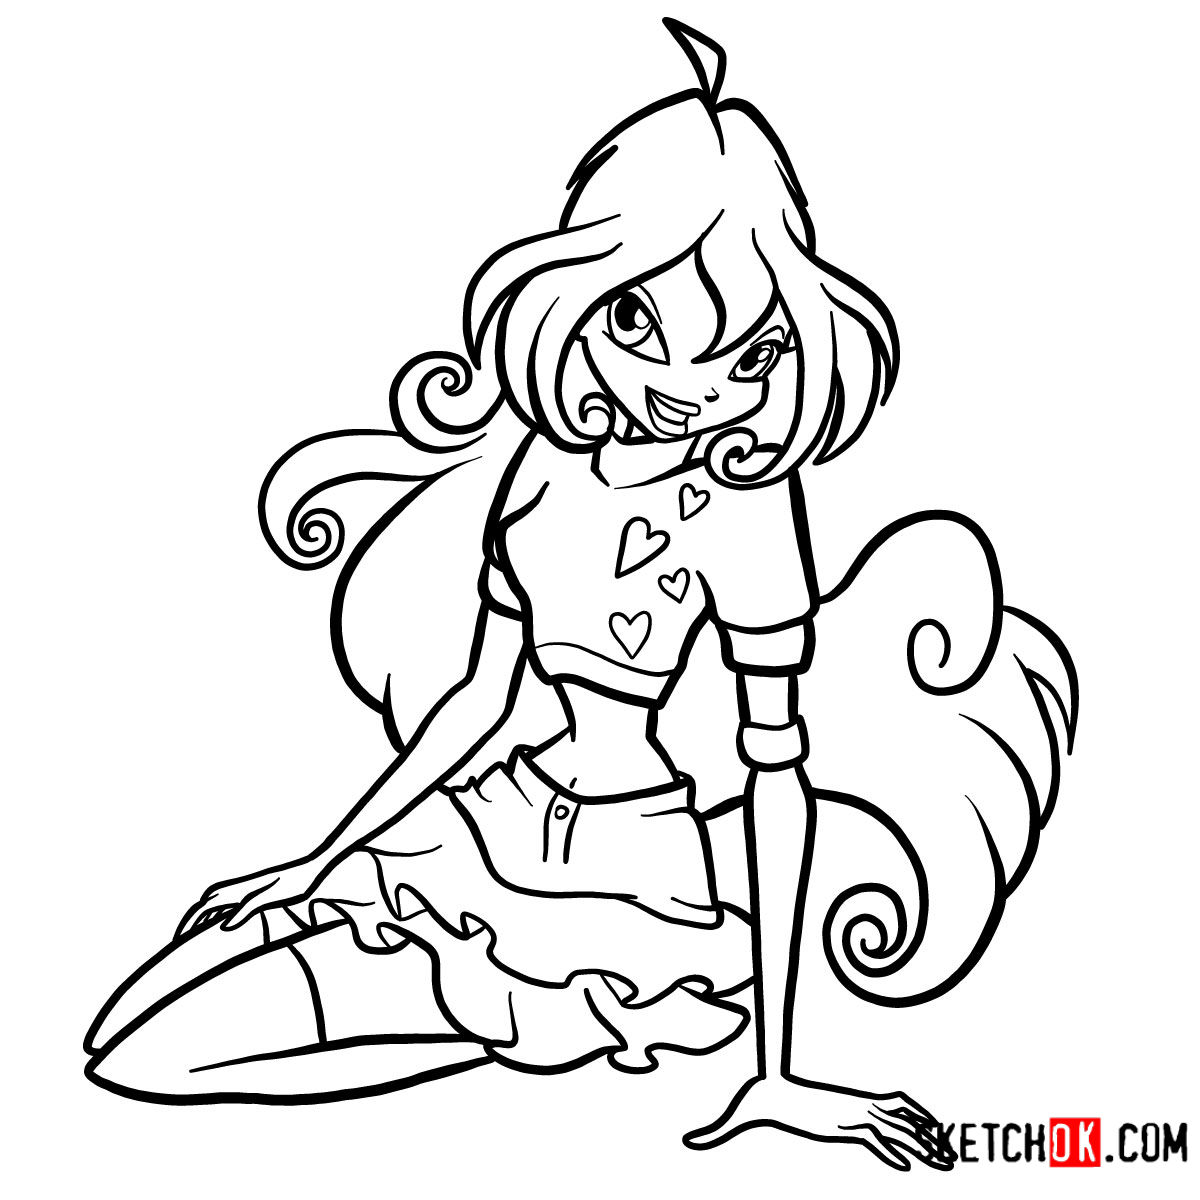 How to draw Bloom fire fairy sitting and smiling